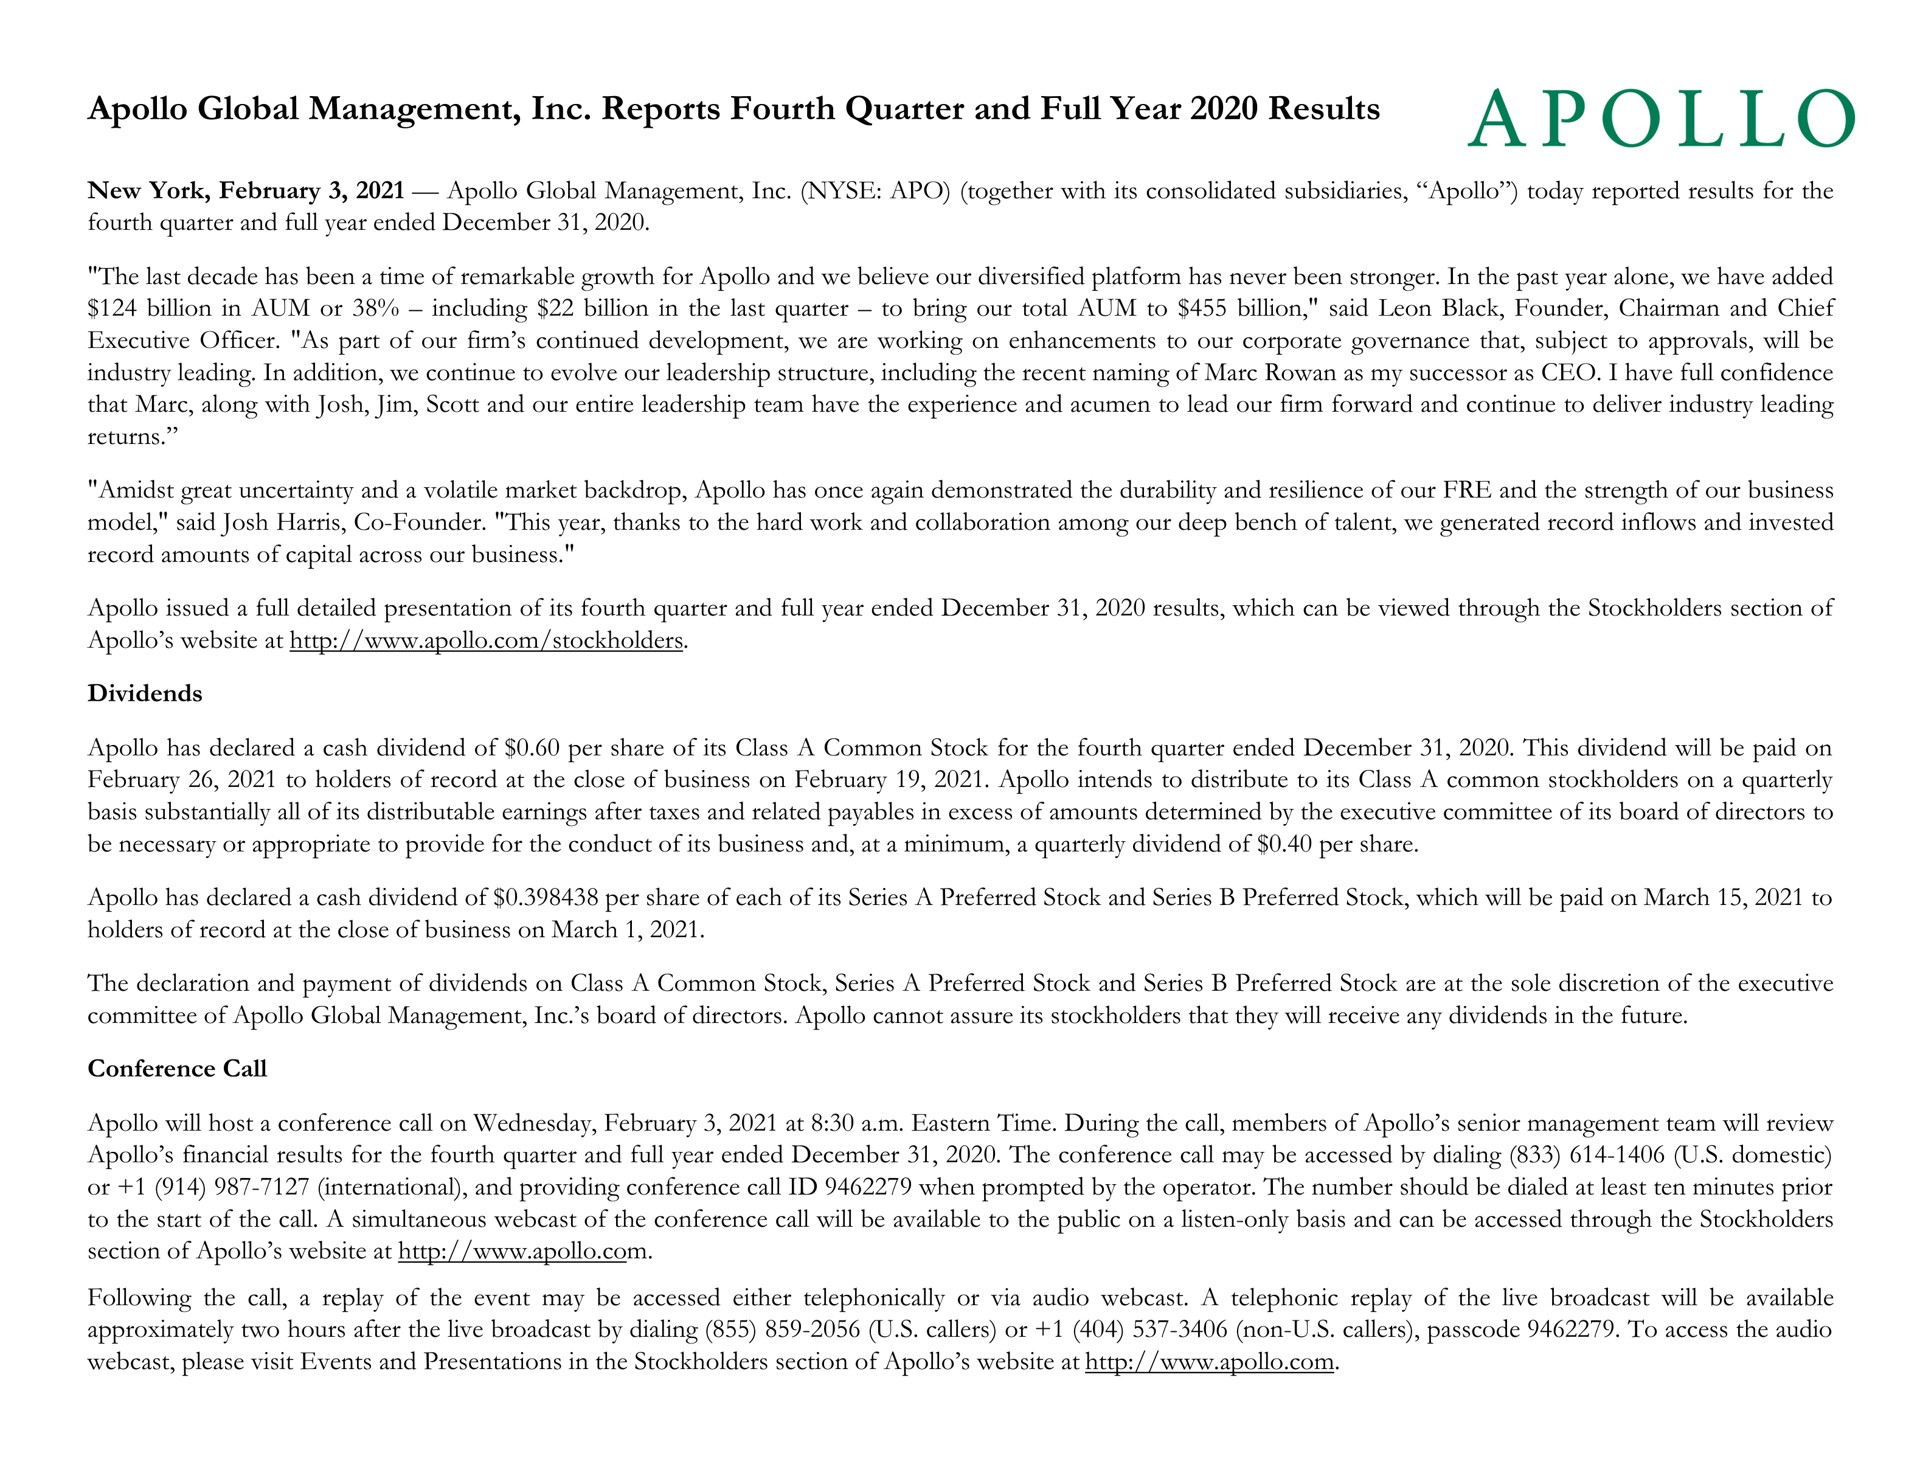 global management reports fourth quarter and full year results a | Apollo Global Management